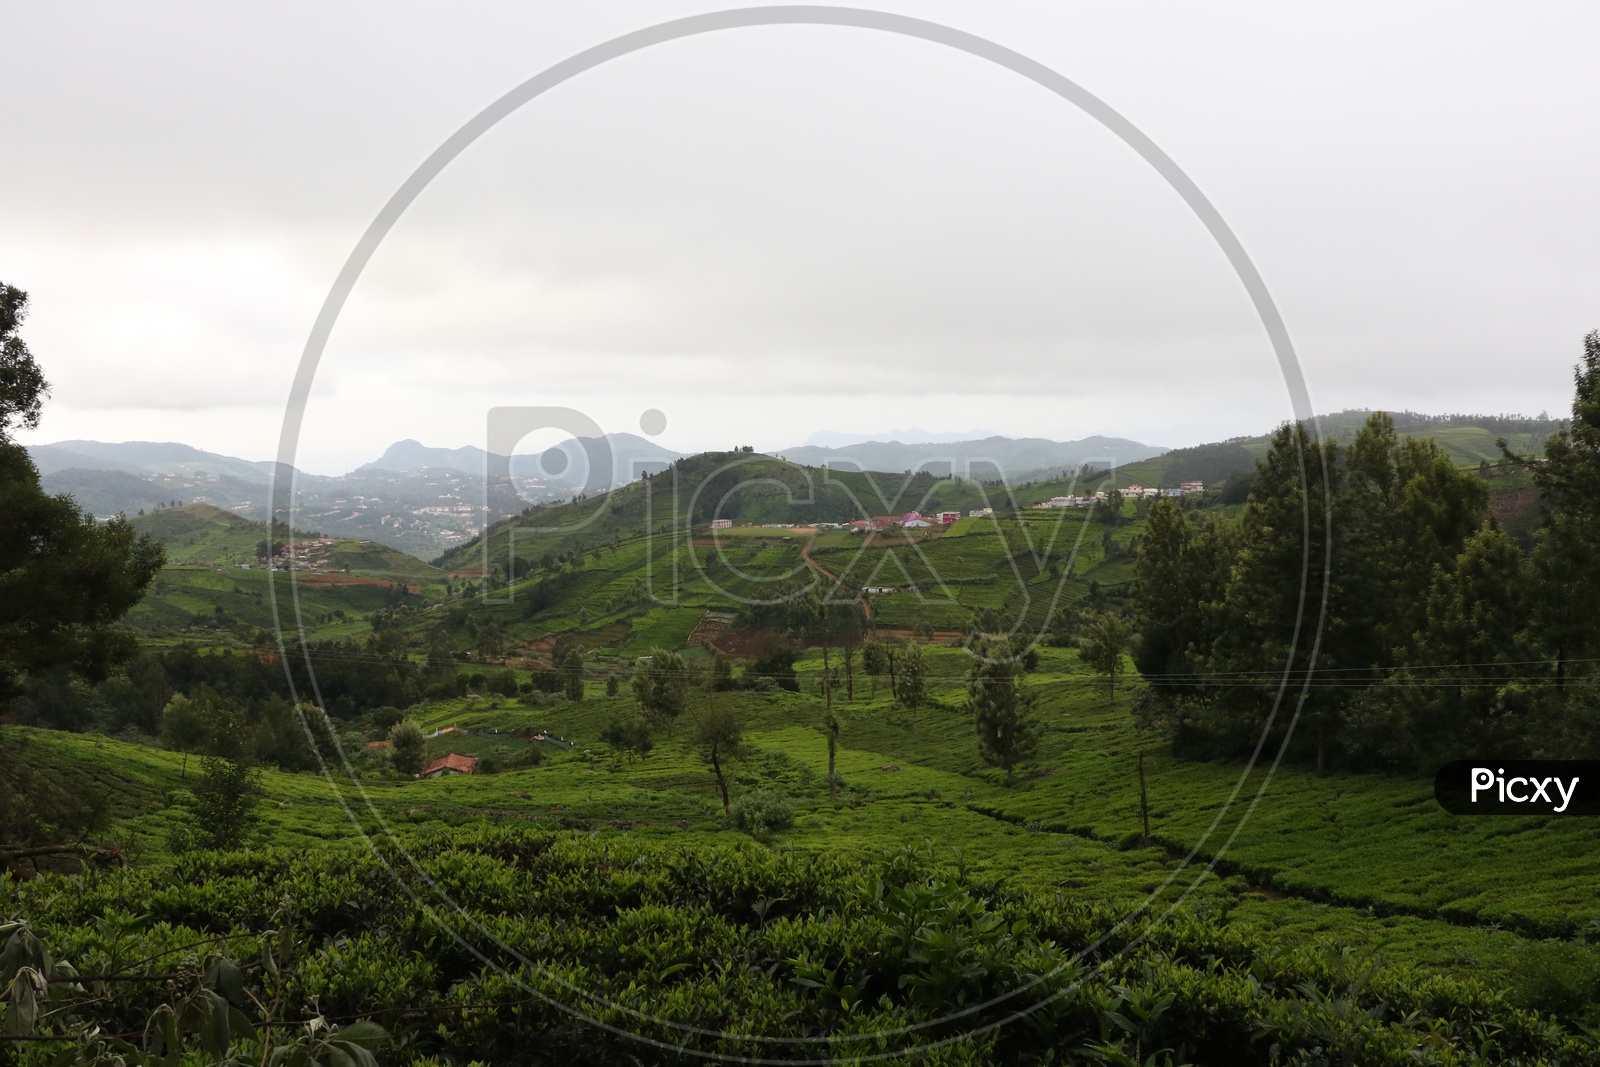 A View of Tea Plantations in Ooty